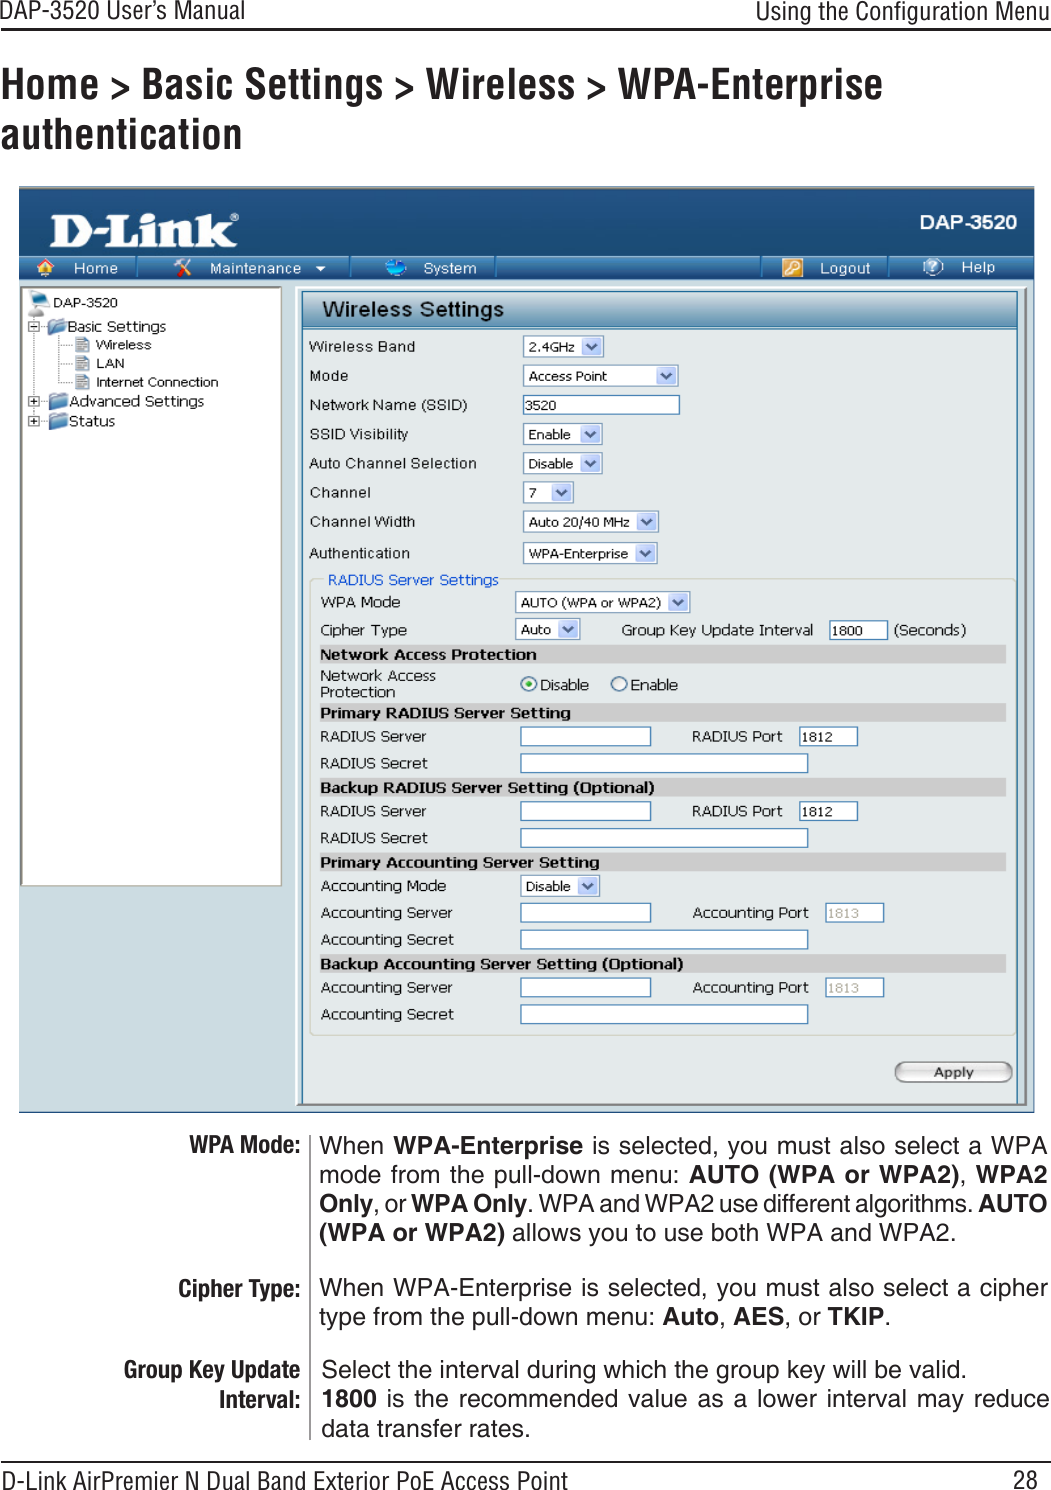 28DAP-3520 User’s Manual D-Link AirPremier N Dual Band Exterior PoE Access PointHome &gt; Basic Settings &gt; Wireless &gt; WPA-Enterprise authenticationCipher Type: Group Key Update Interval: When WPA-Enterprise is selected, you must also select a cipher type from the pull-down menu: Auto, AES, or TKIP.Select the interval during which the group key will be valid. 1800 is  the recommended  value as a lower interval may reduce data transfer rates.Using the Conﬁguration MenuWhen WPA-Enterprise is selected, you must also select a WPA mode from the pull-down menu: AUTO (WPA or WPA2), WPA2 Only, or WPA Only. WPA and WPA2 use different algorithms. AUTO (WPA or WPA2) allows you to use both WPA and WPA2. WPA Mode: 